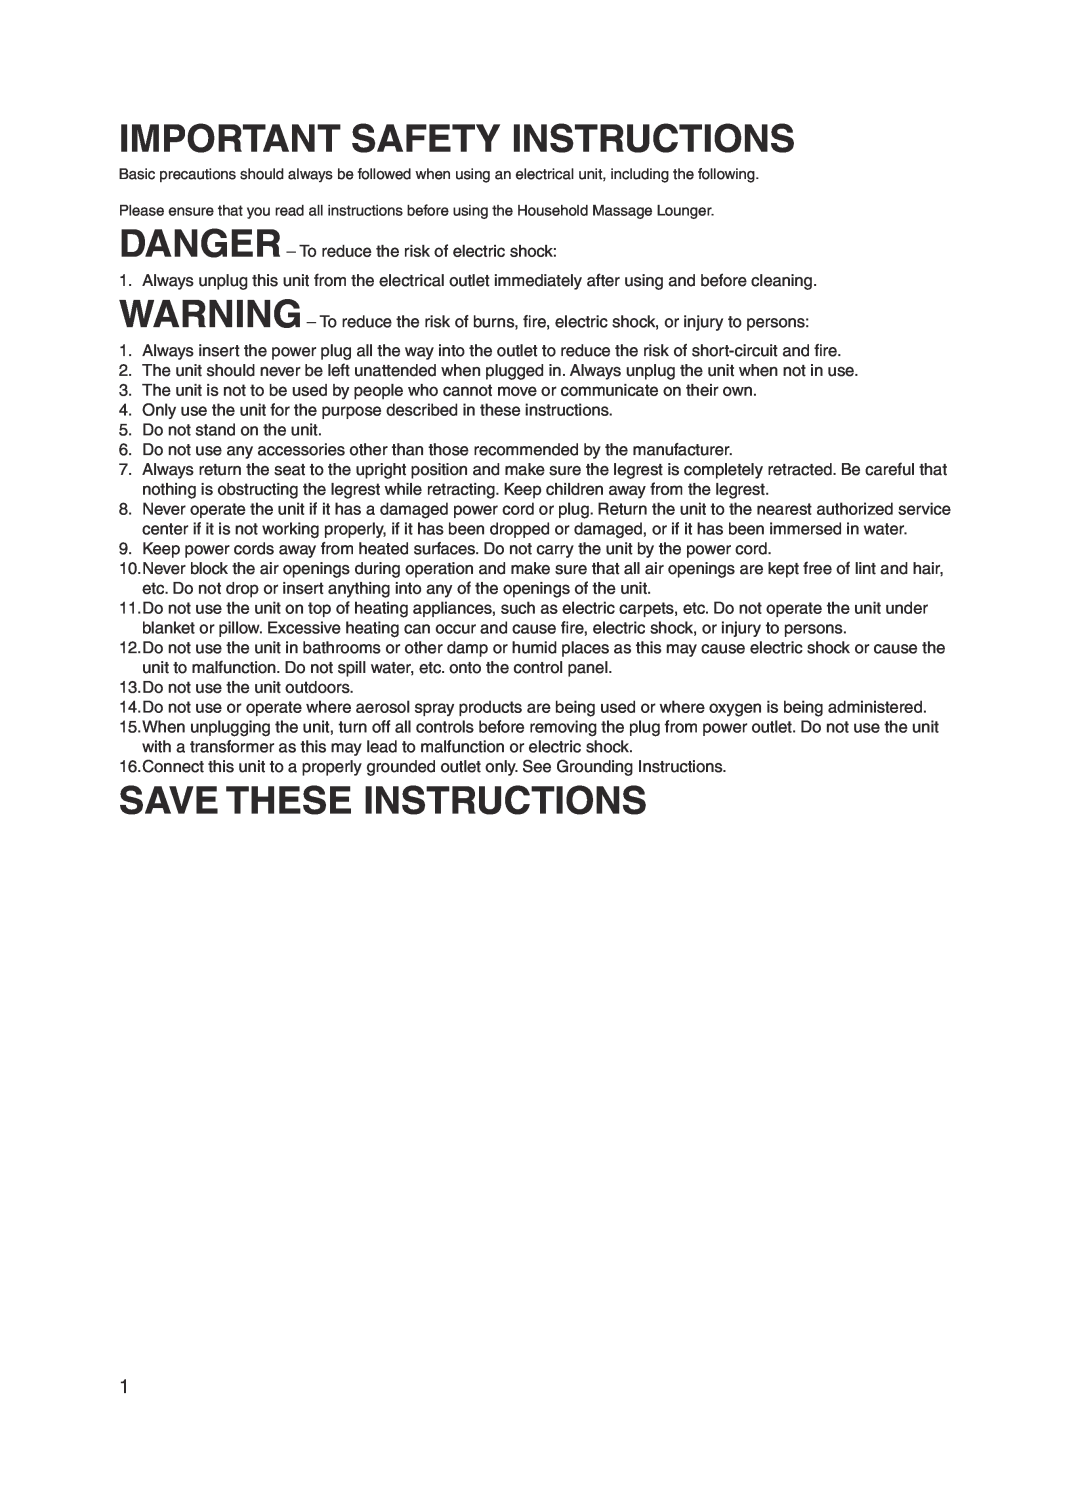 Panasonic 30003 manual Important Safety Instructions, Save These Instructions 